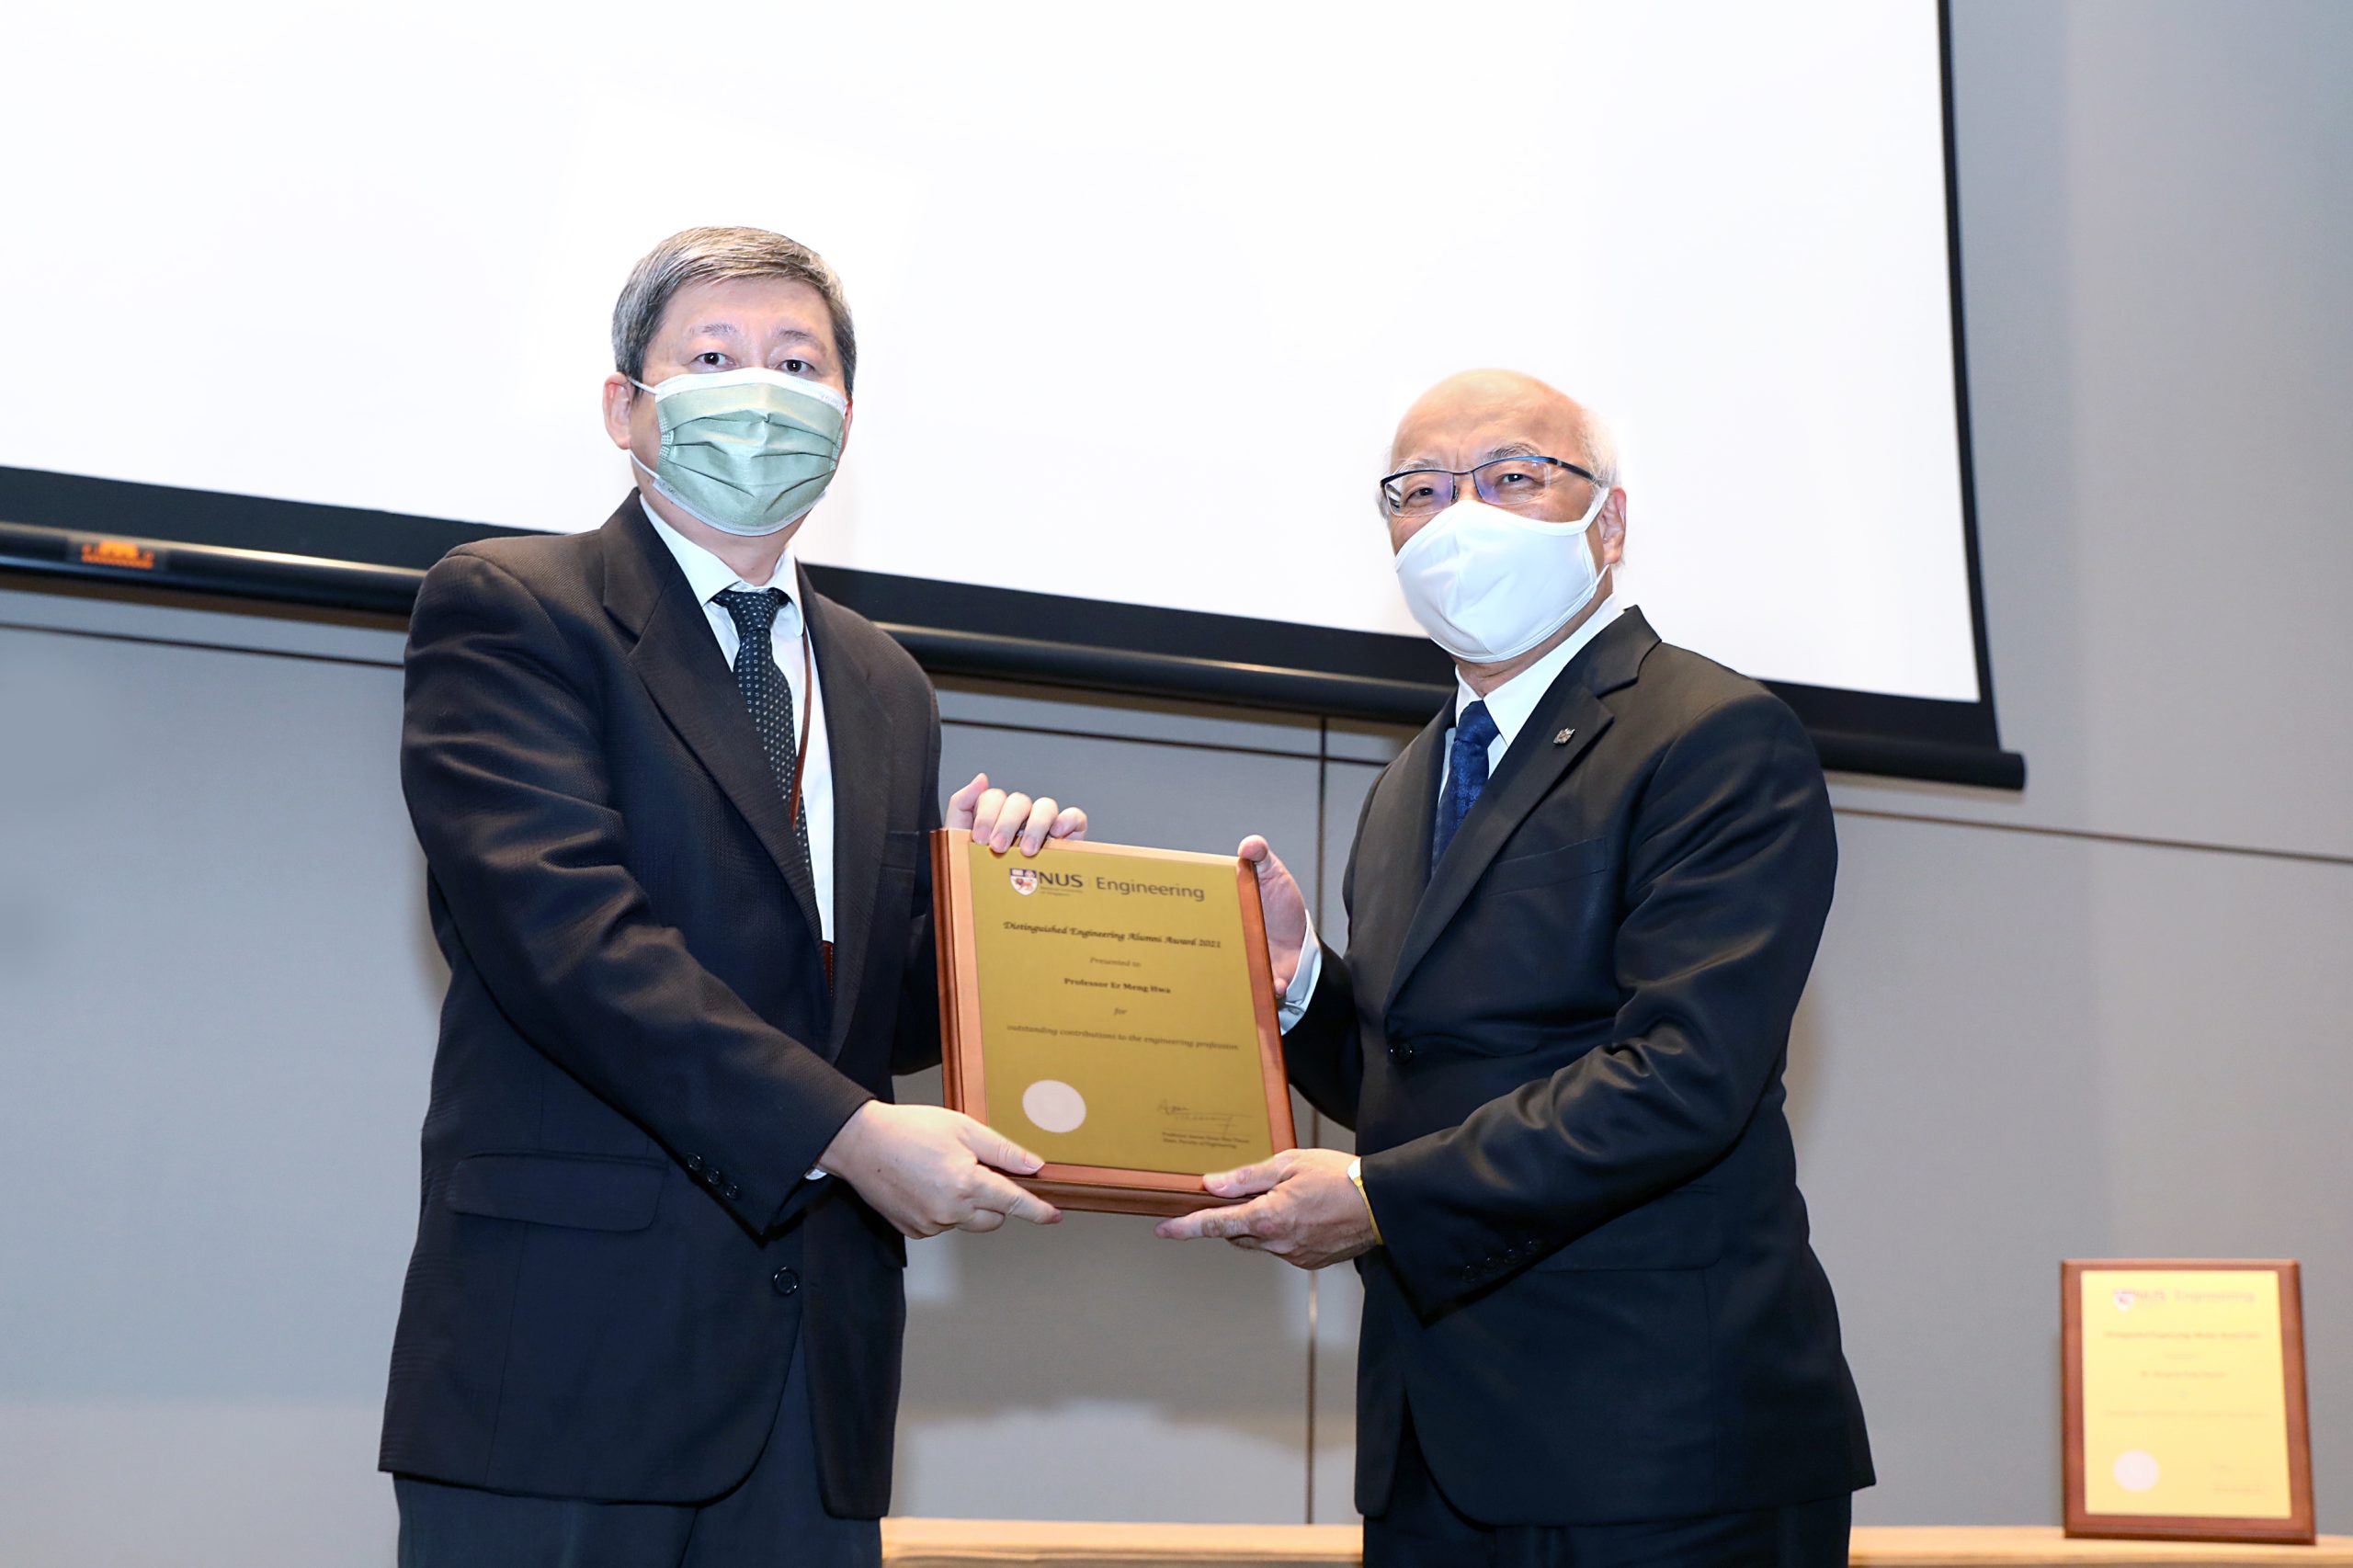 Professor Er Meng Hwa receiving the Distinguished Engineering Alumni Award from Professor Liang Yung Chii, Head of Department of Electrical and Computer Engineering